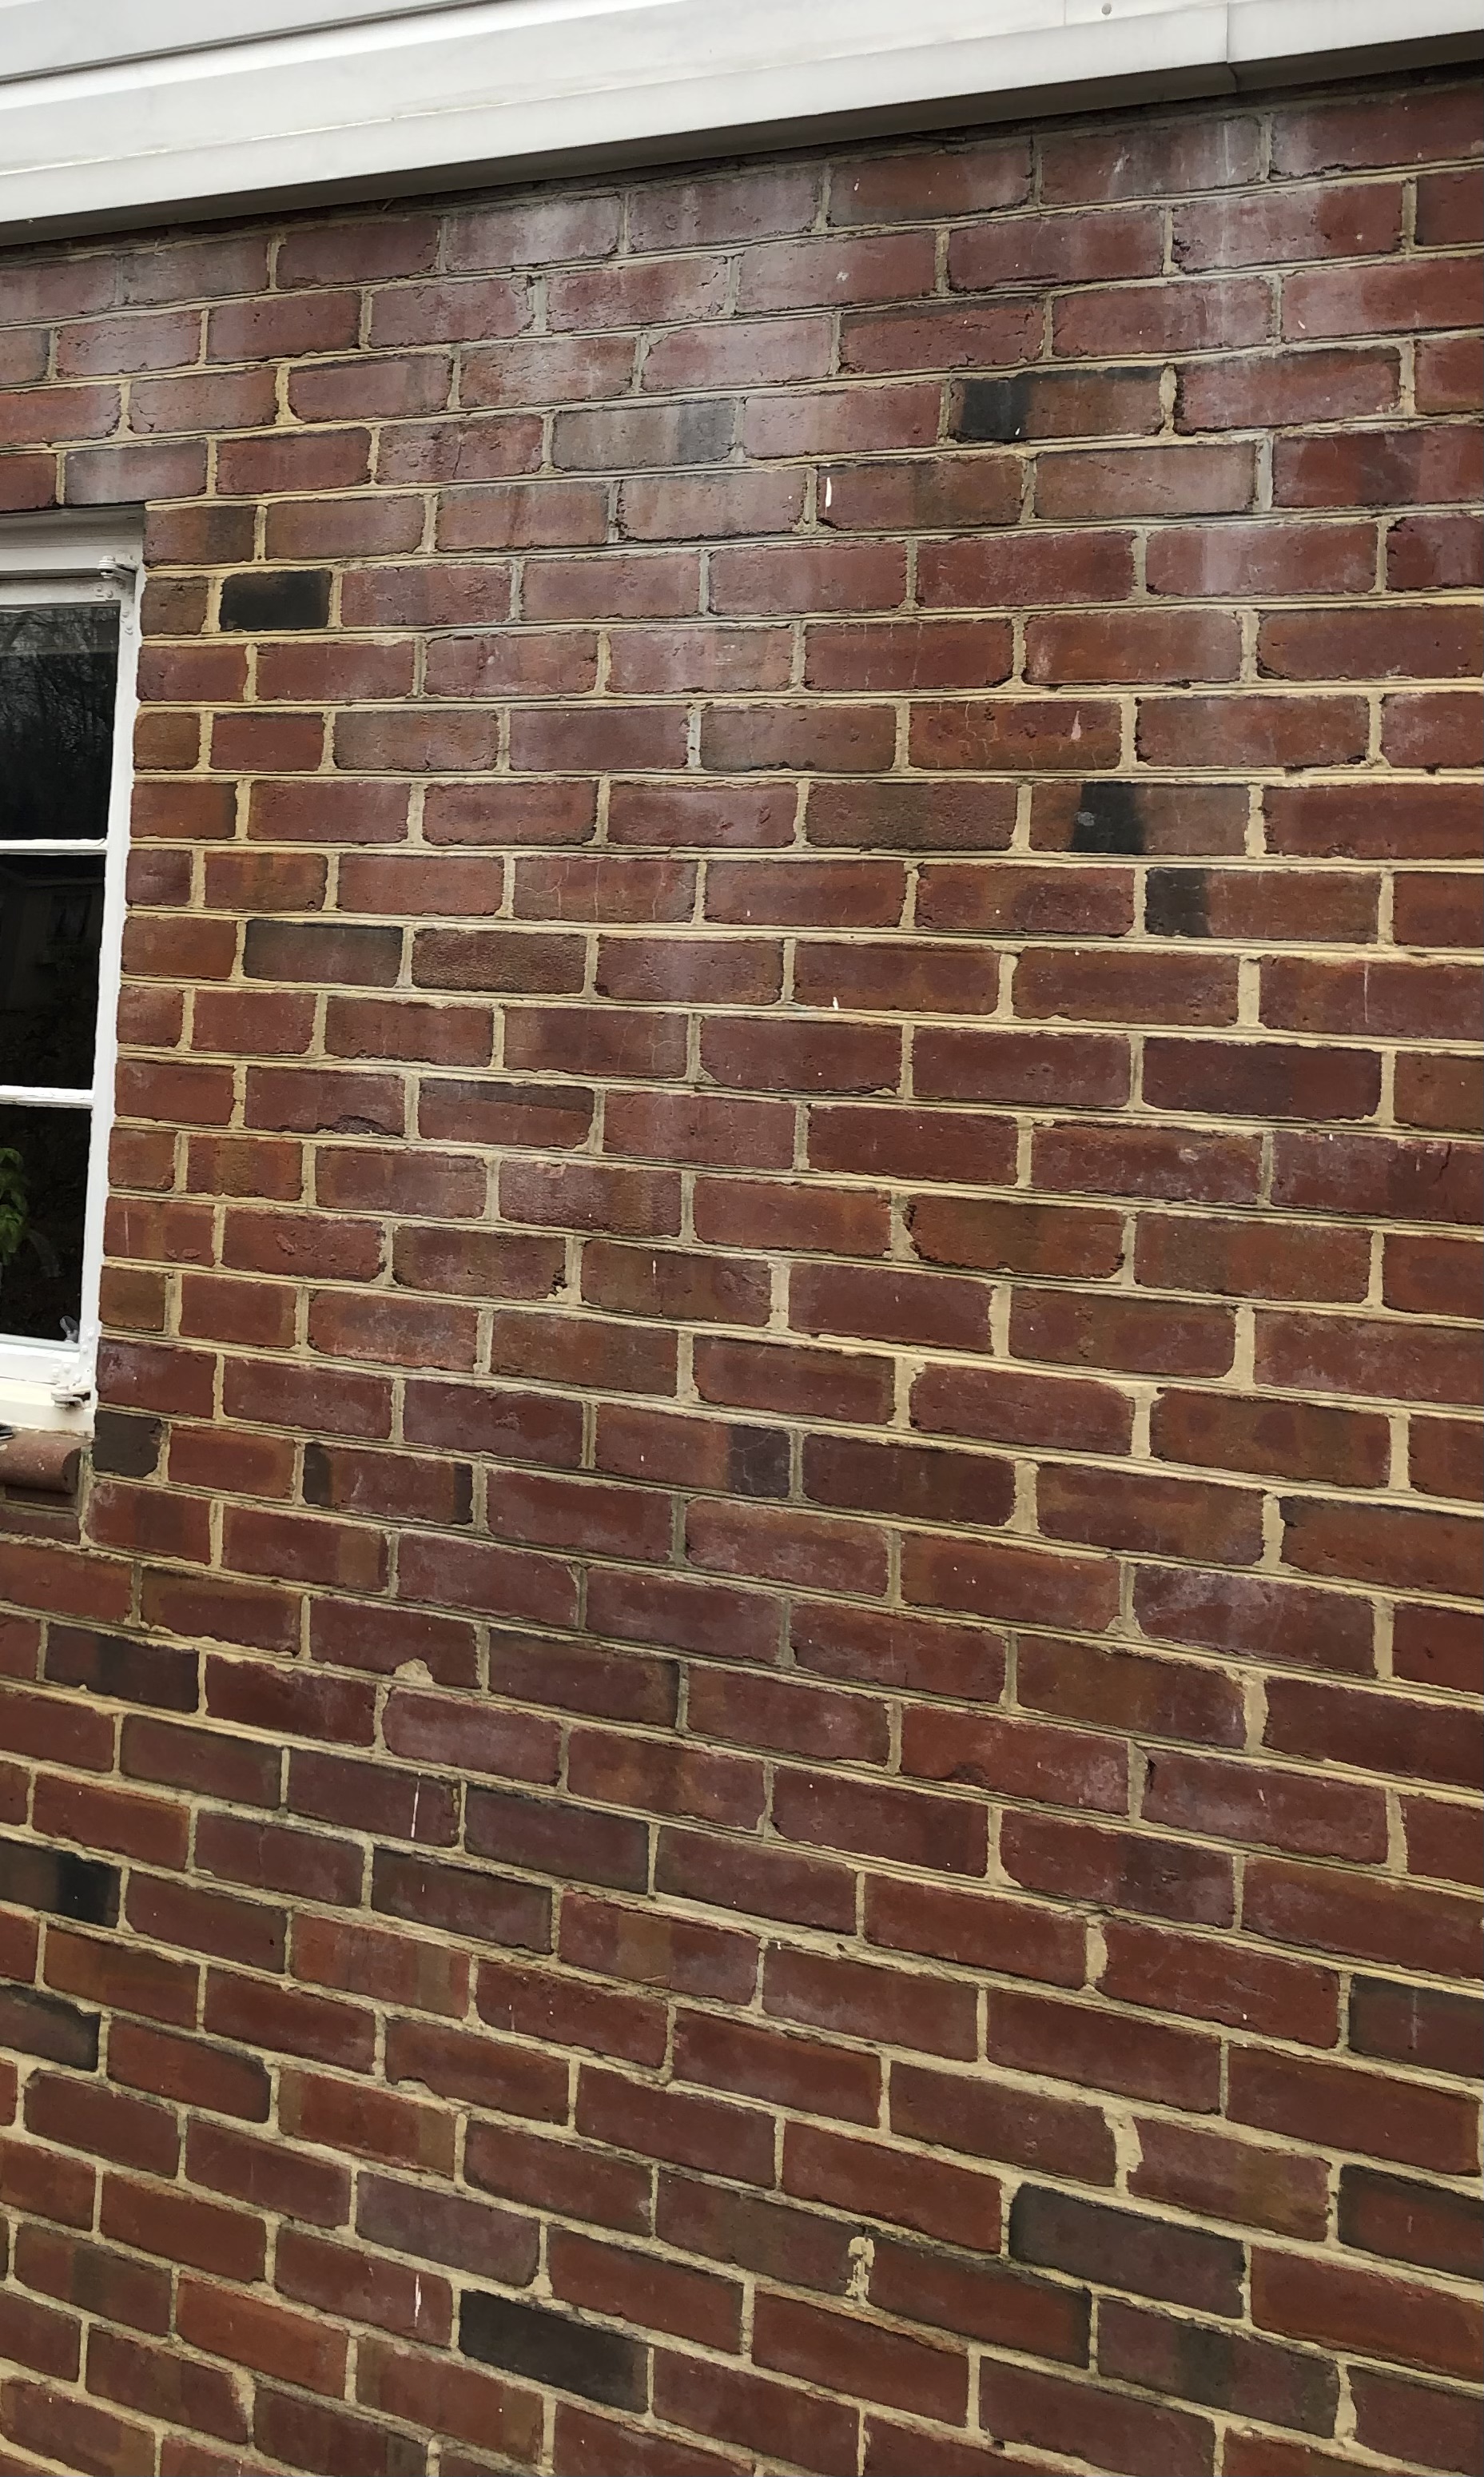 Removed white chalky residue from brick in Staunton Va Image